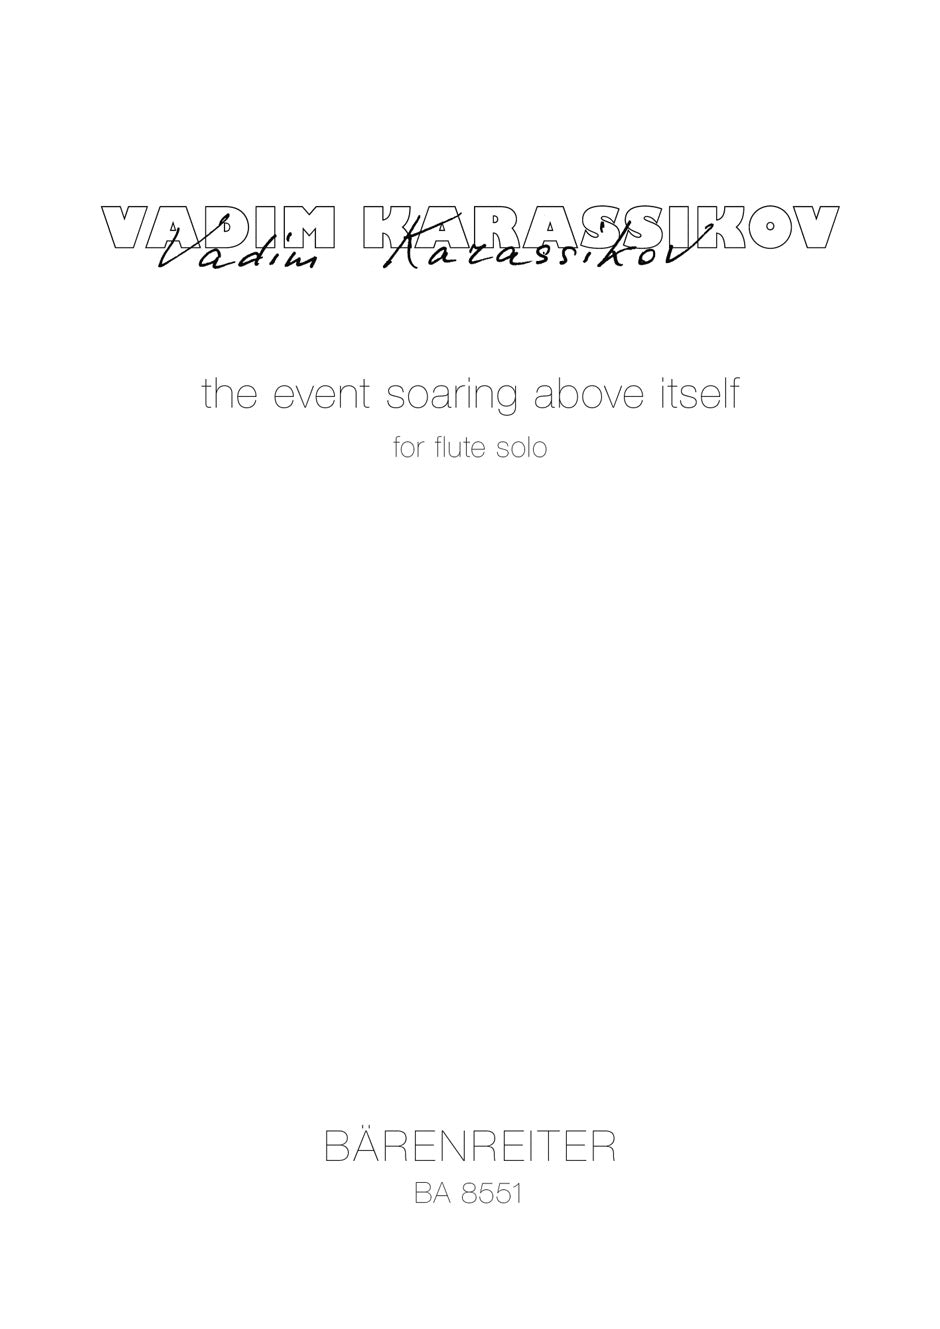 the event soaring above itself for flute solo (2000)